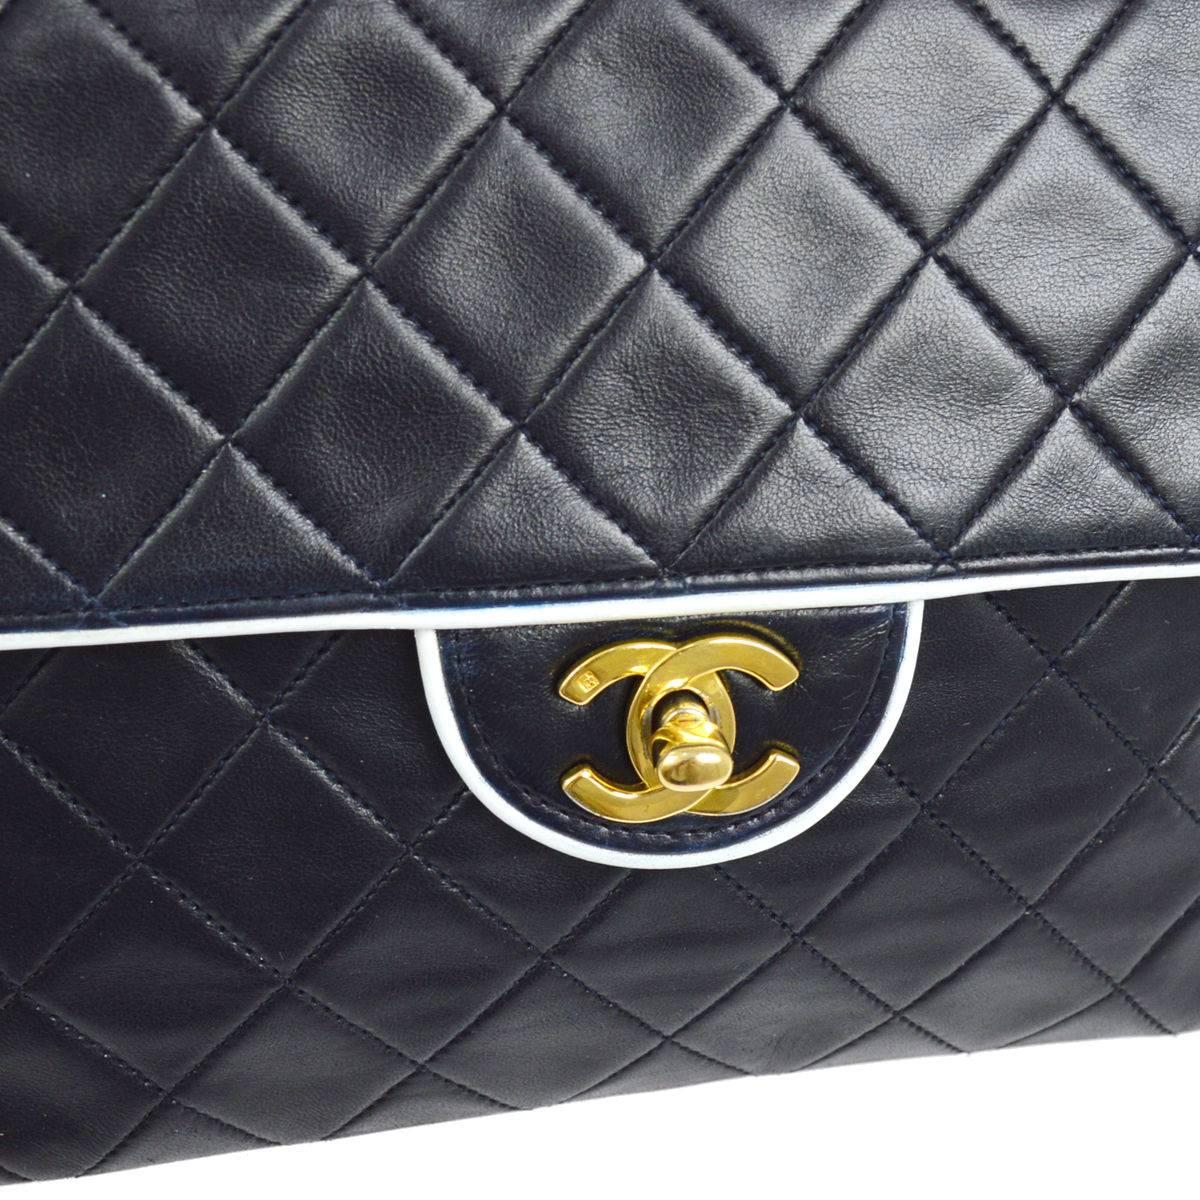 CURATOR'S NOTES

Chanel Vintage Two Tone White Piping Lambskin Leather Evening Clutch Flap Bag 

Style Tip: Wear this gorgeous Chanel as a single or double flap shoulder bag for ultimate versatility!

Lambskin
Gold tone hardware
Turnlock